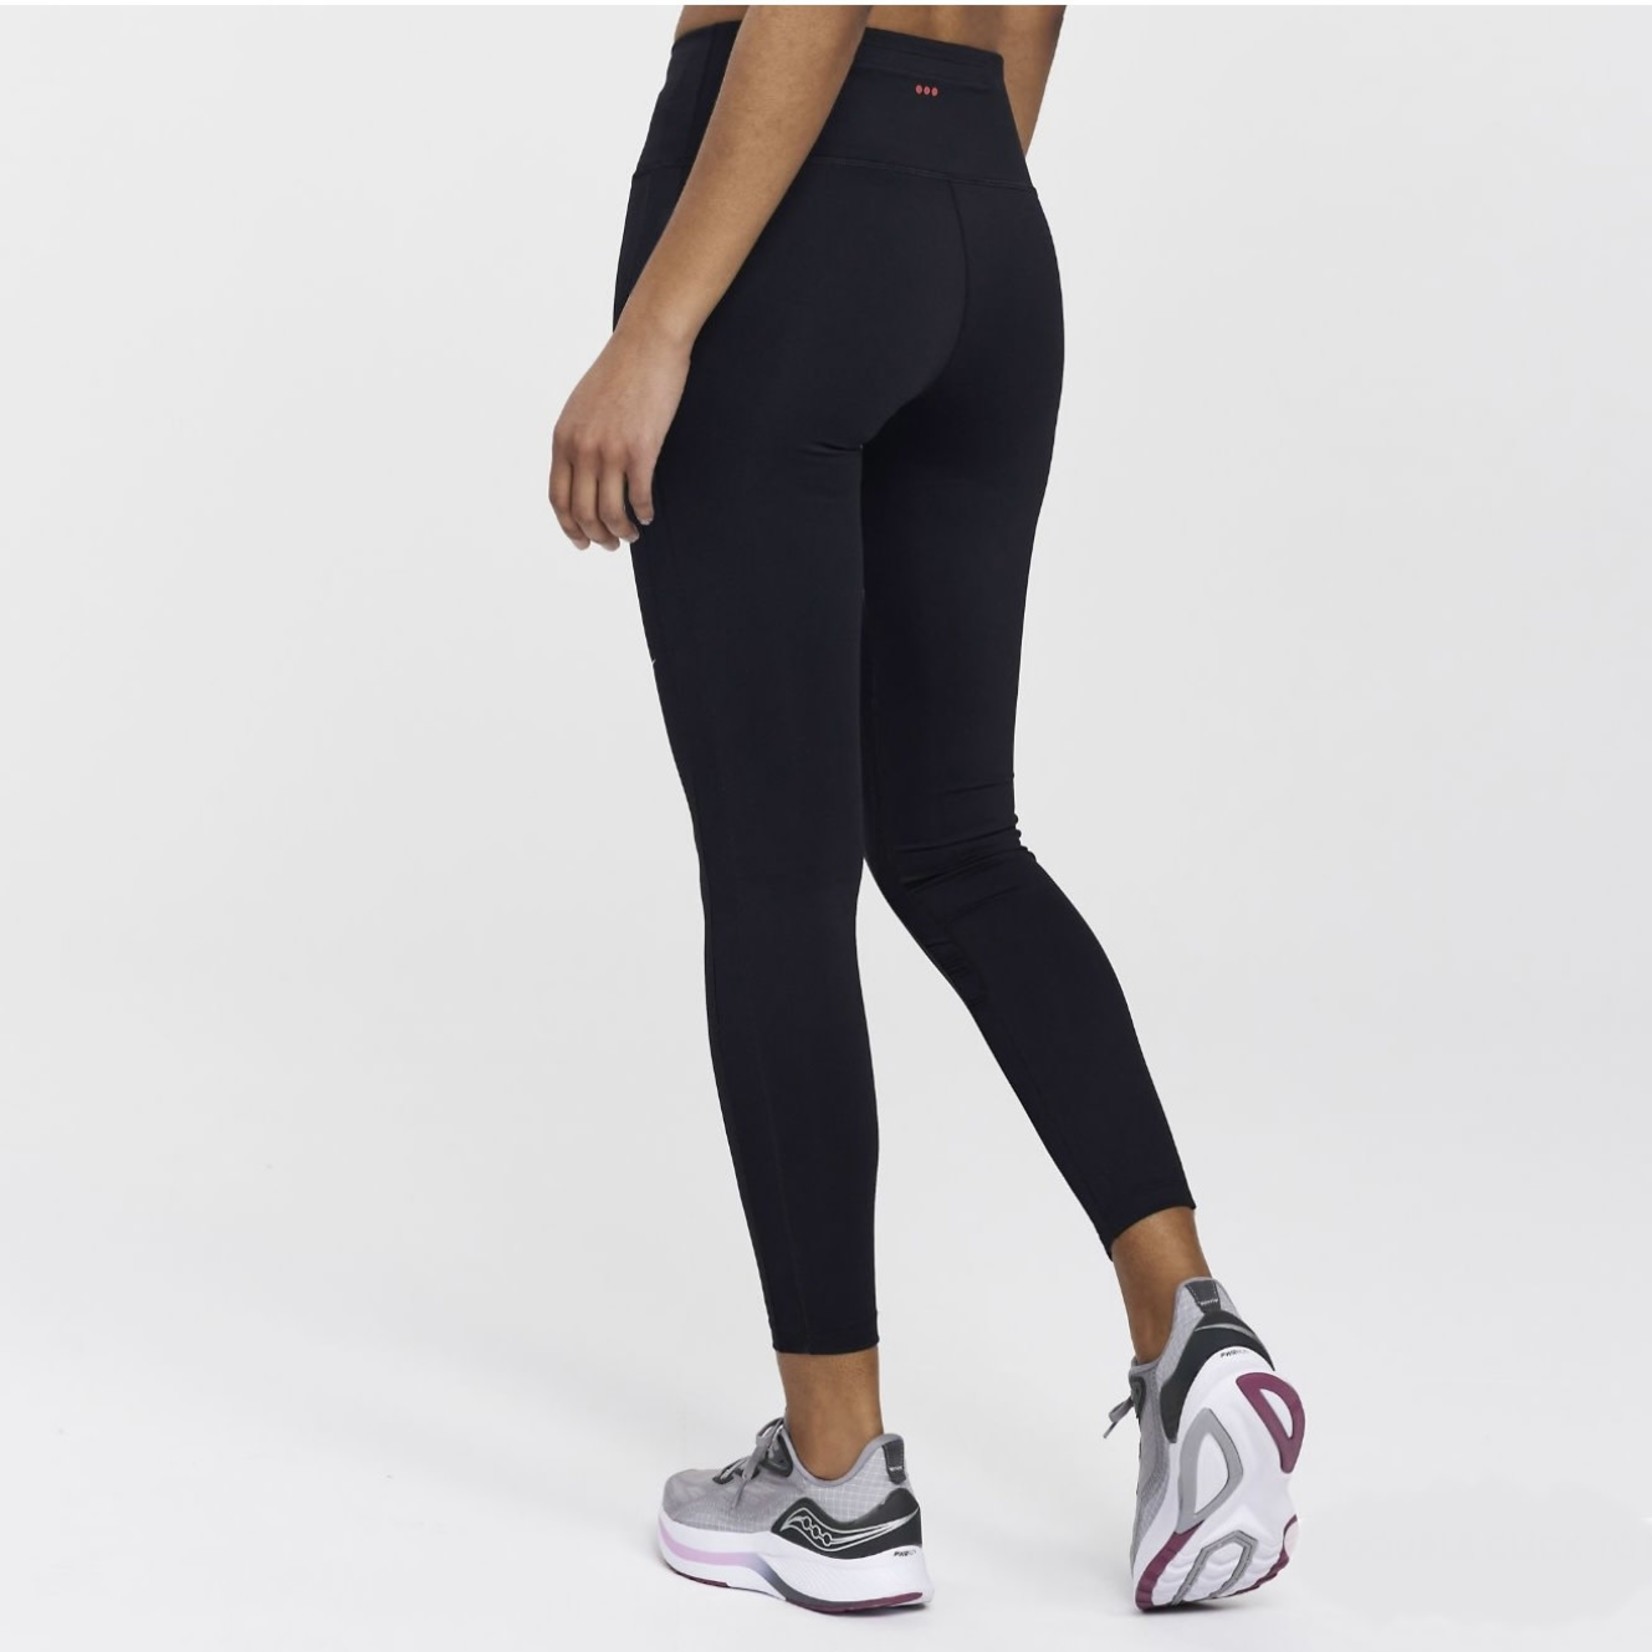 Saucony Saucony Fortify Tight, Women's